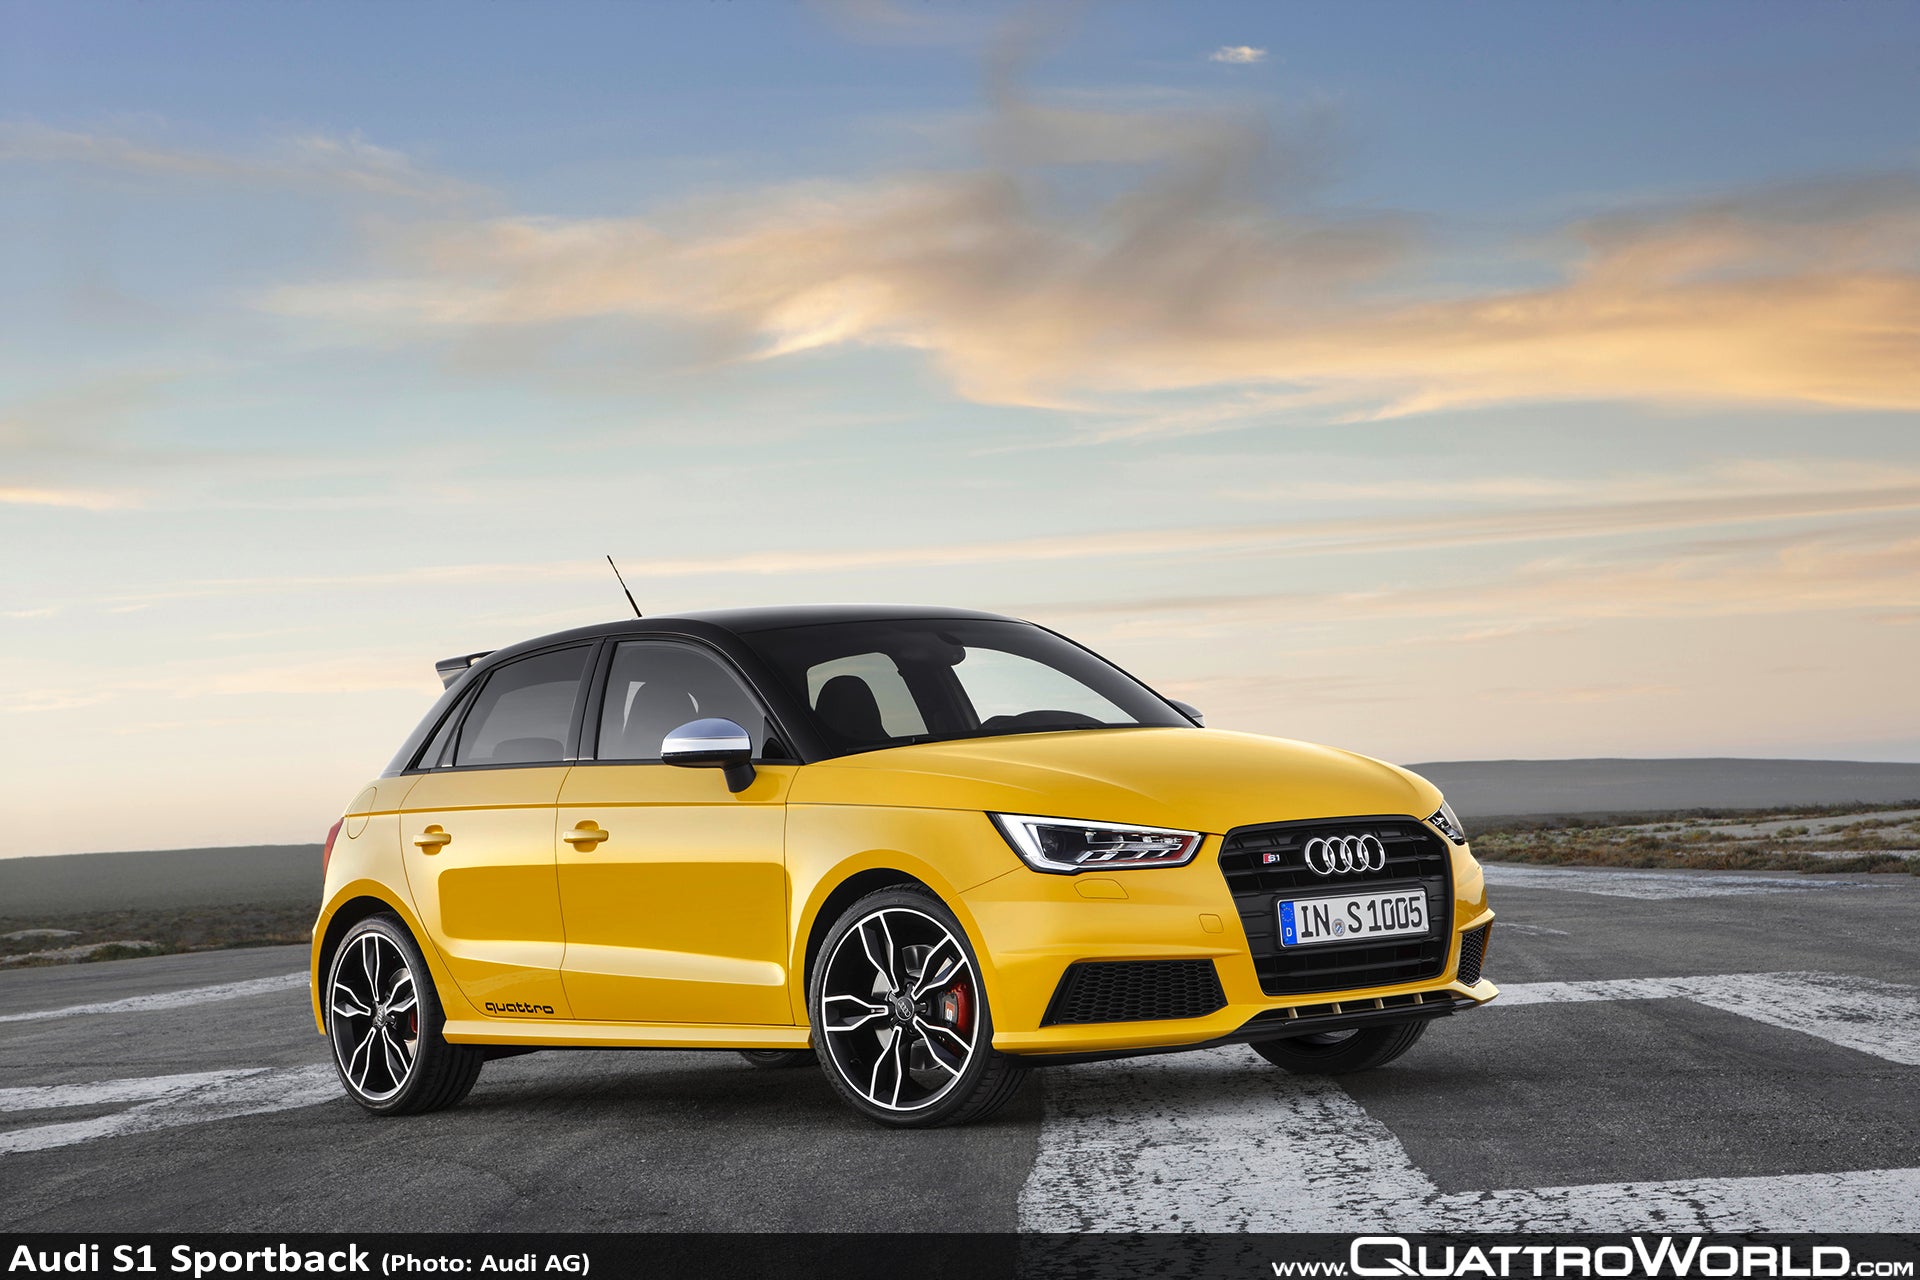 Pygmalion Heel boos Logisch Audi AG: The Audi S1 and the Audi S1 Sportback - QuattroWorld